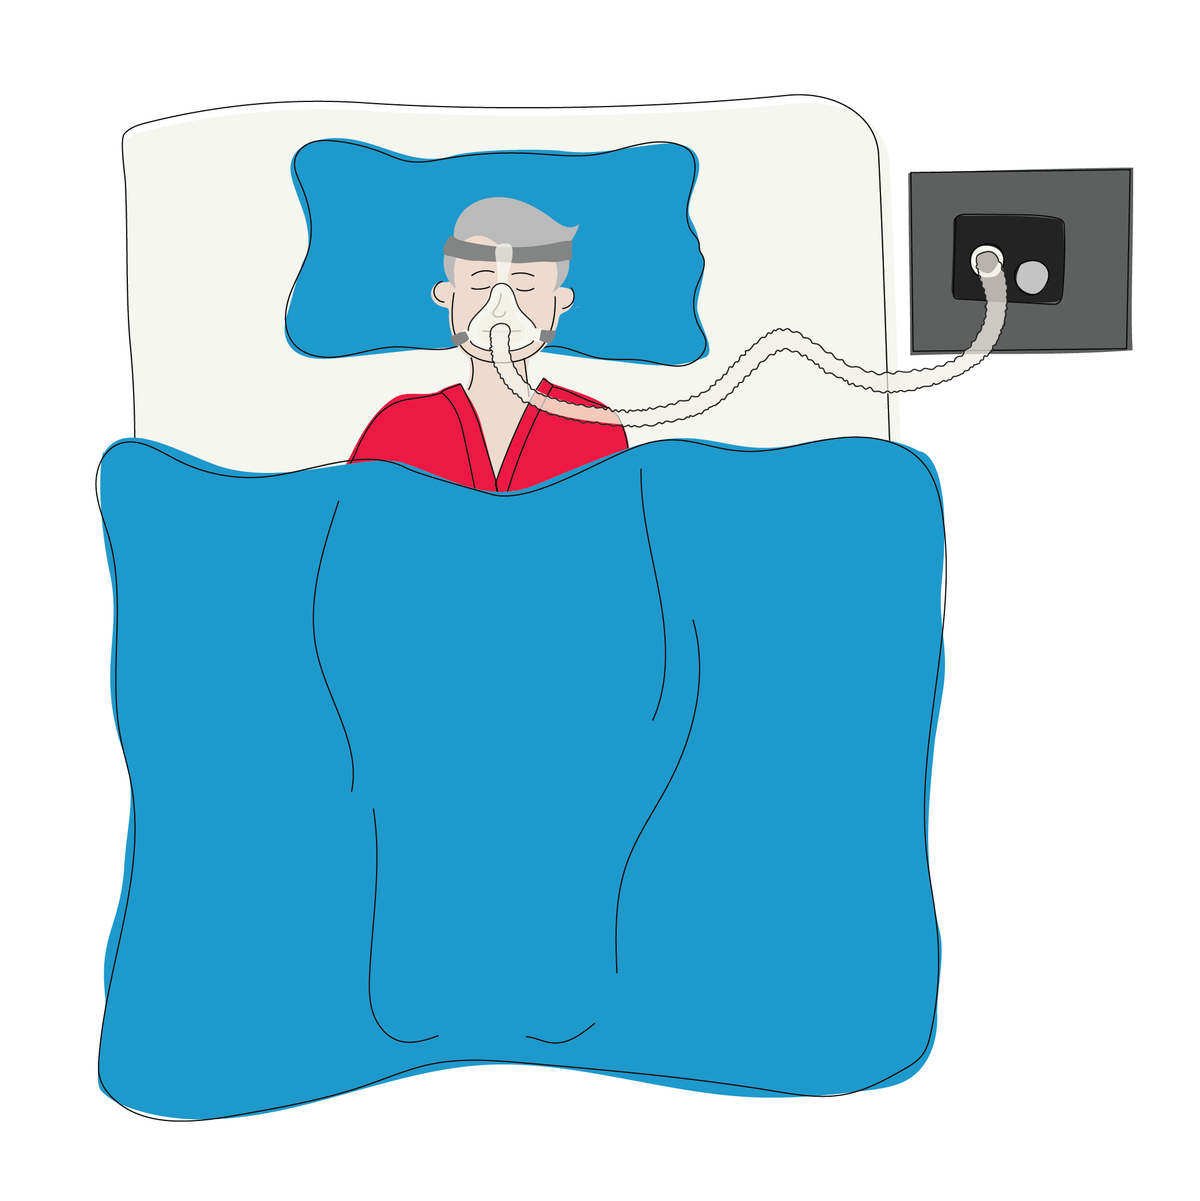 A graphic of a man sleeping with a CPAP machine